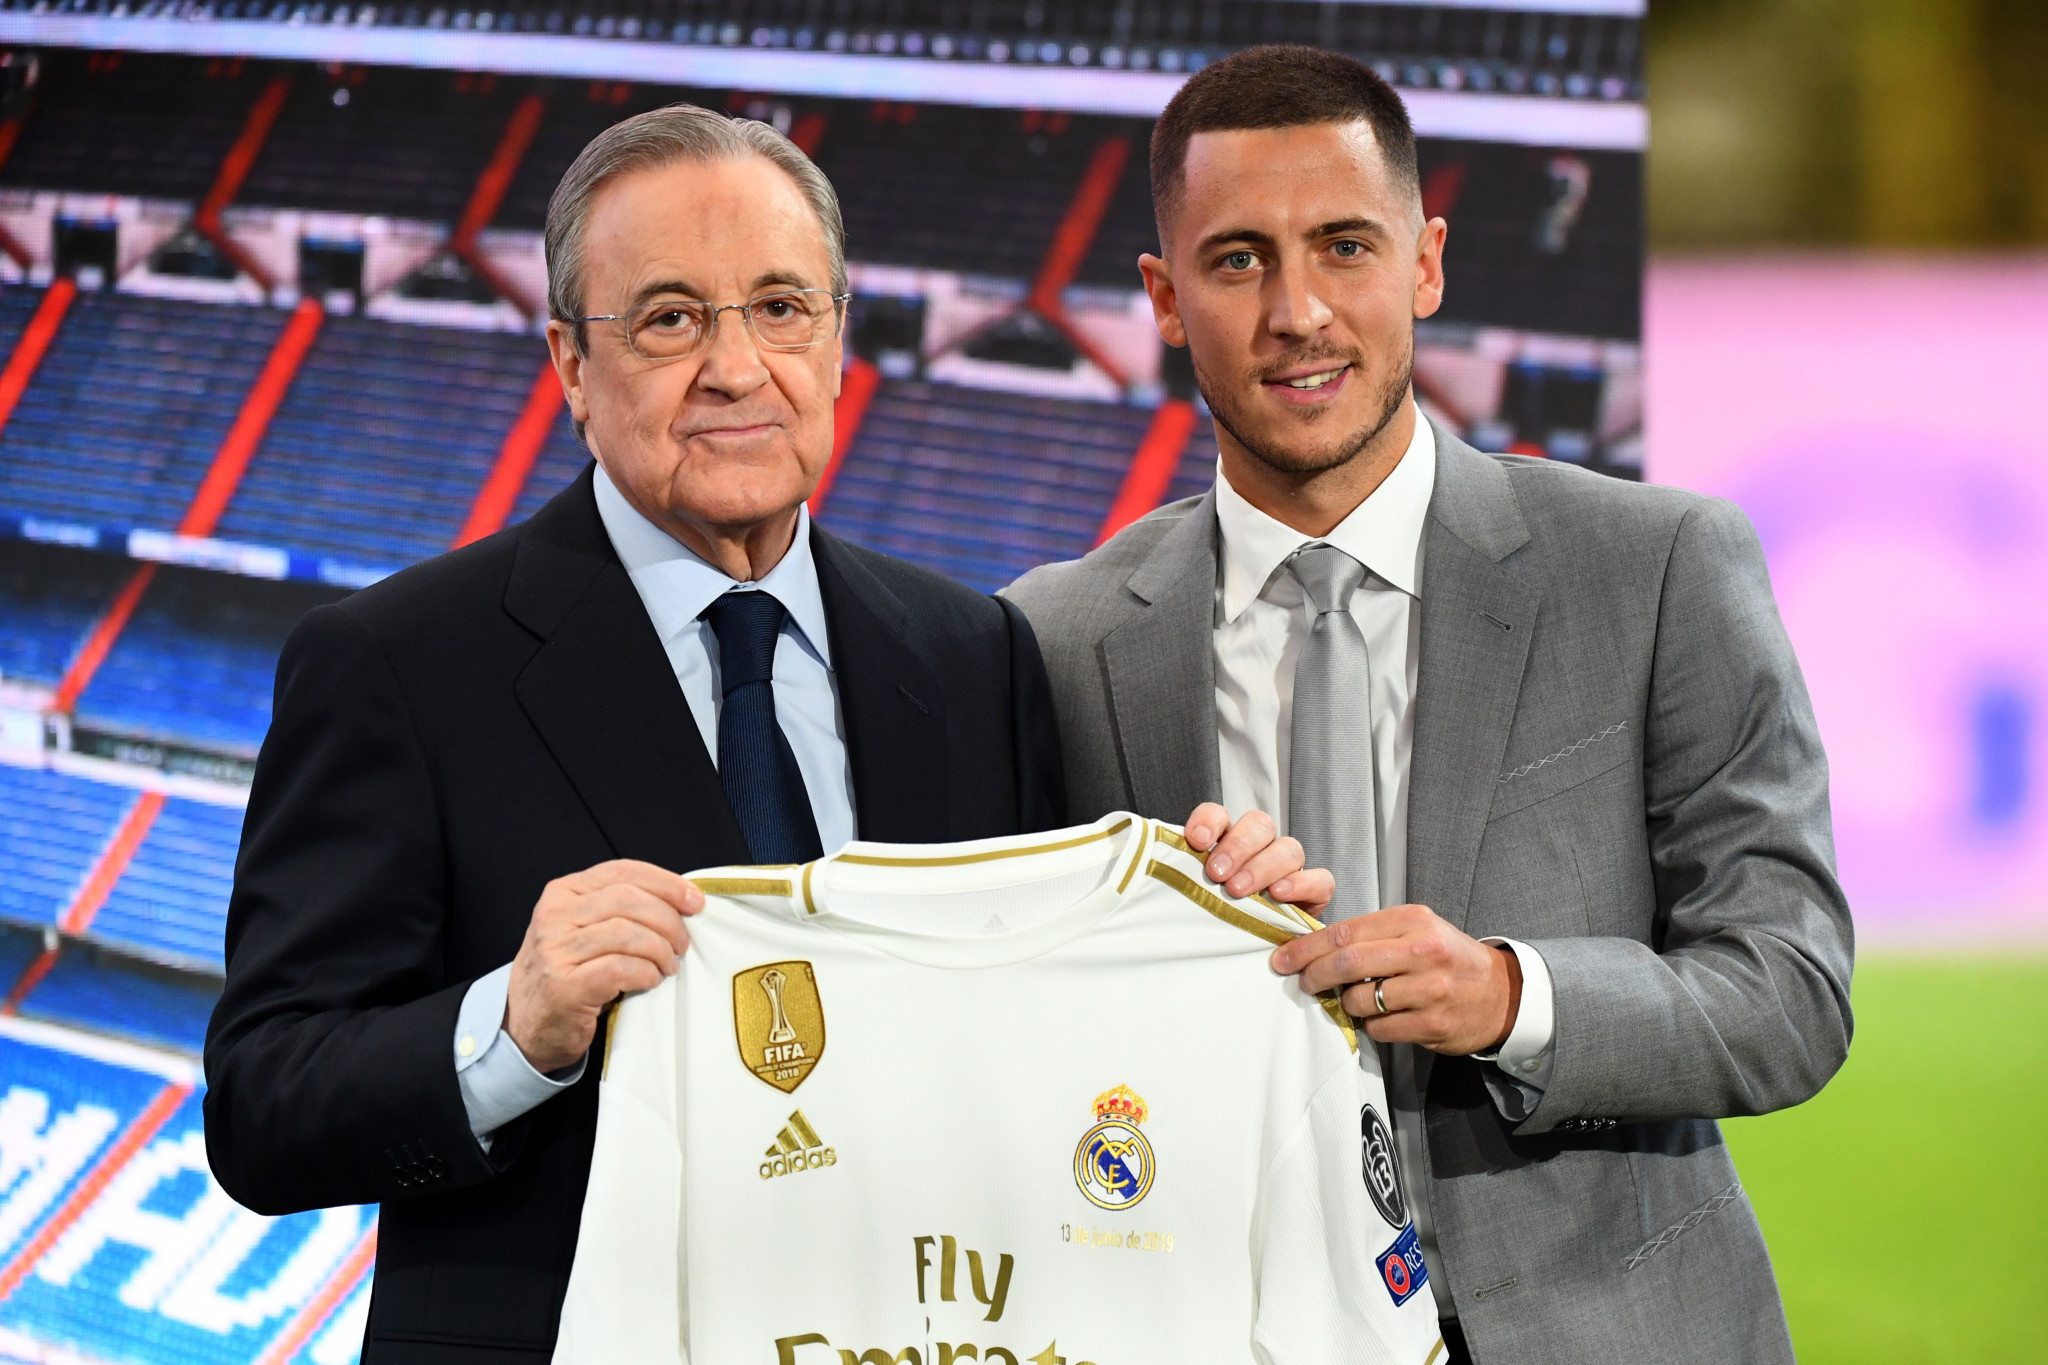 Real Madrid President Florentino Pérez, left, with Eden Hazard, will be aiming to sign the best names in women's football after the launch of a women's team ©Getty Images